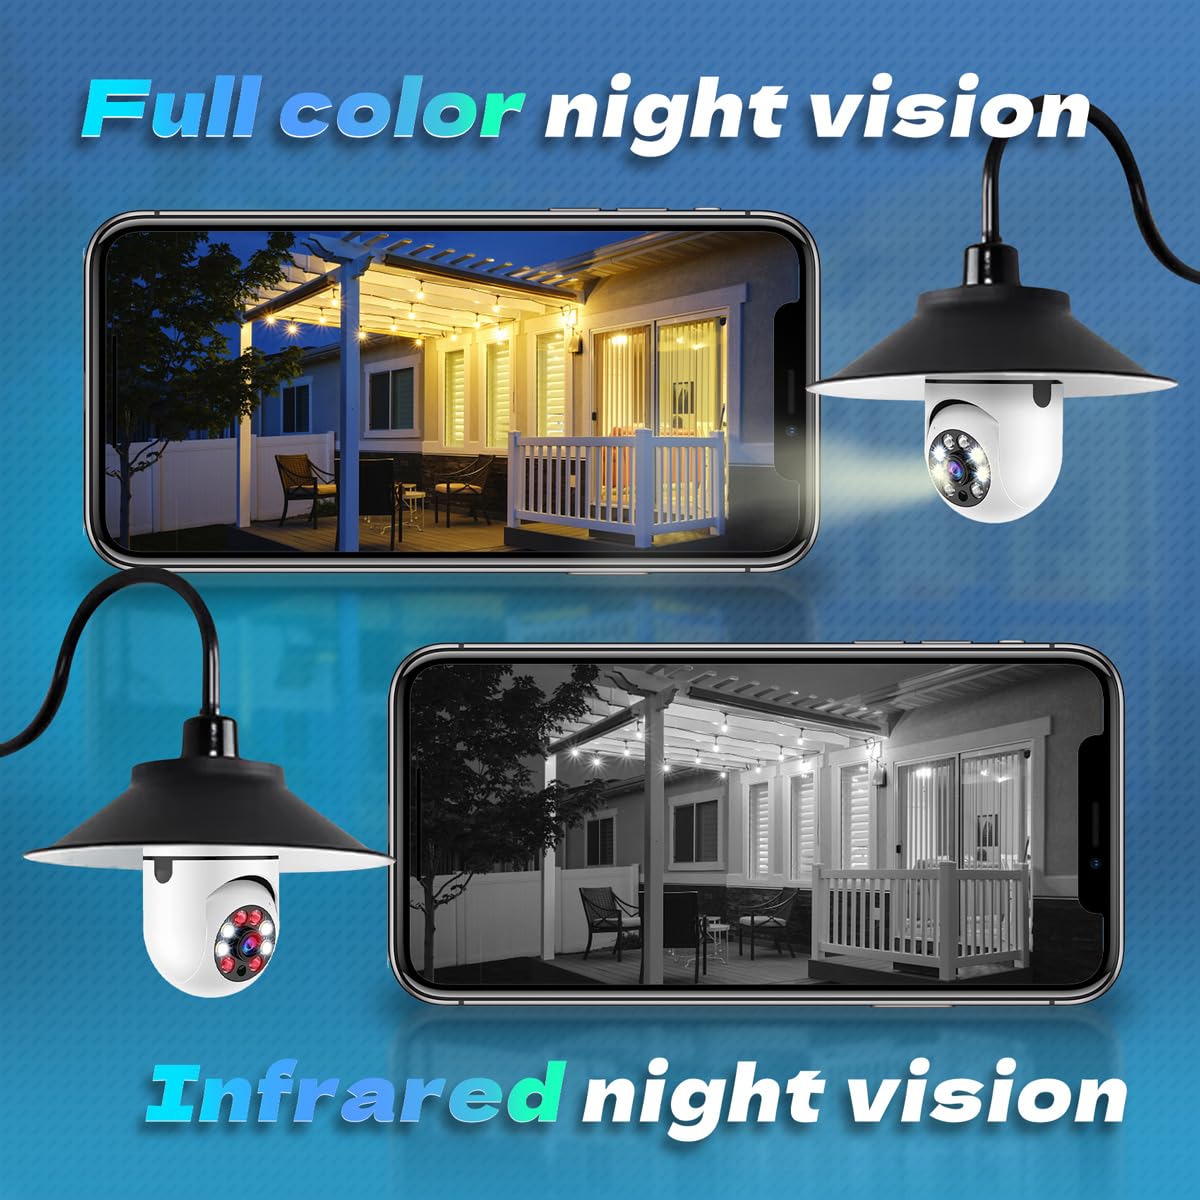 BJR 2K / 3MP Light Bulb Security Camera, 5G & 2.4G WiFi Security Camera Wireless Outdoor Indoor 360 Camera for Home with Color Night Vision Motion&Siren Alert Auto Motion E27 Socket